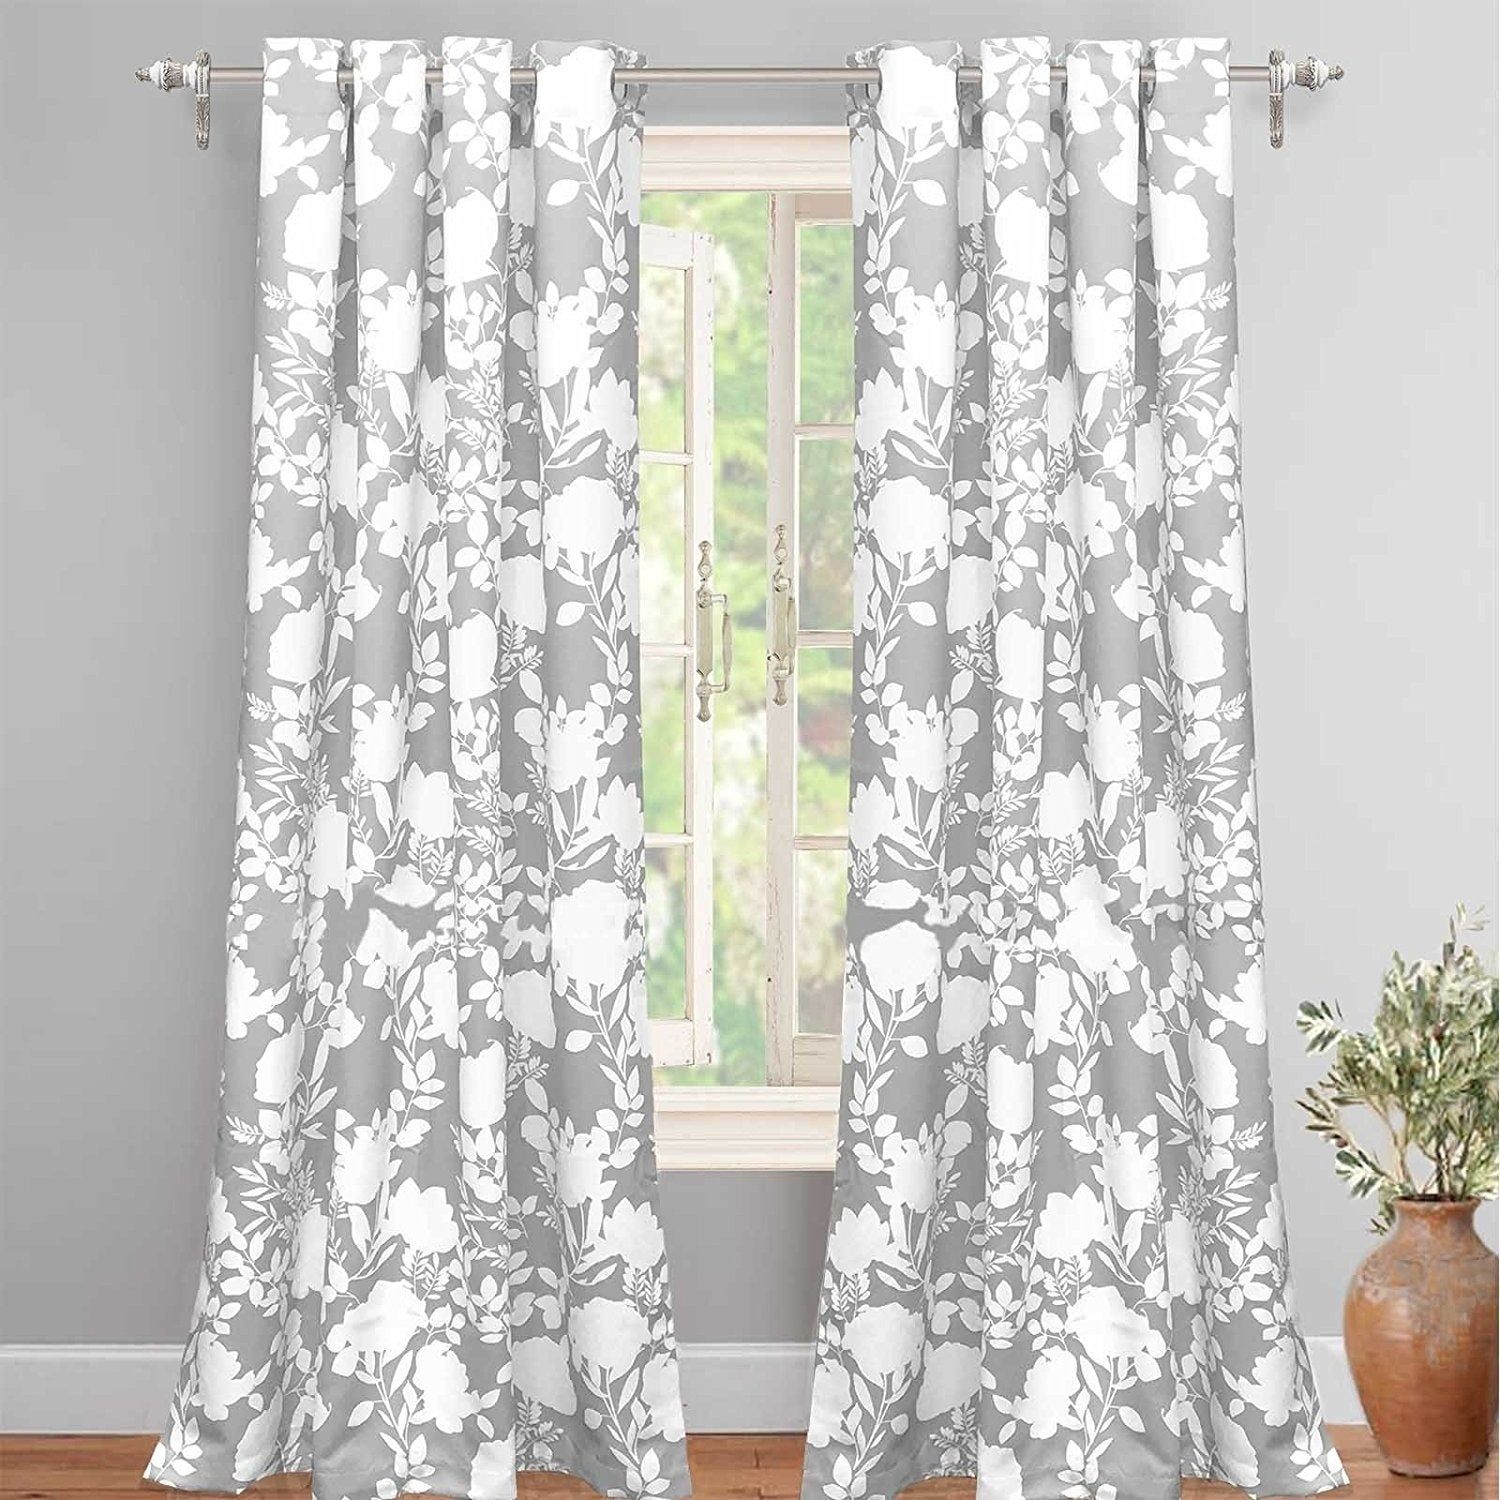 Porch & Den Nolana Floral Room Darkening Grommet Window Curtain Panel Pair Pertaining To Gray Barn Dogwood Floral Curtain Panel Pairs (Photo 10 of 20)